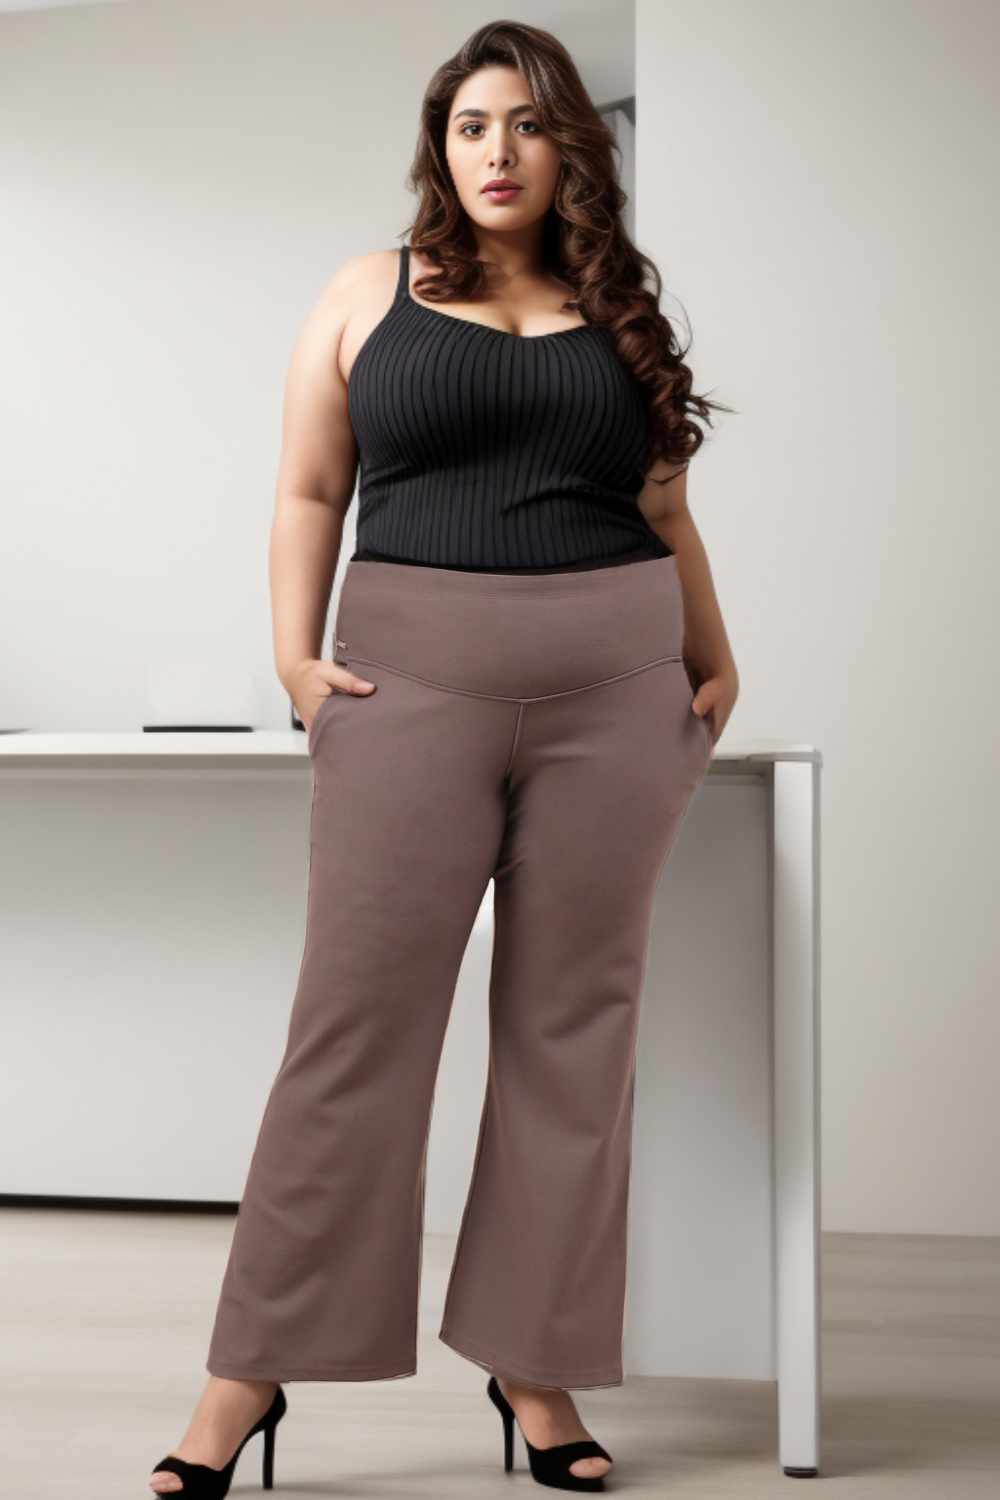 JGTDBPO Plus Size Flared Pants For Women Bell Bottom Trousers With